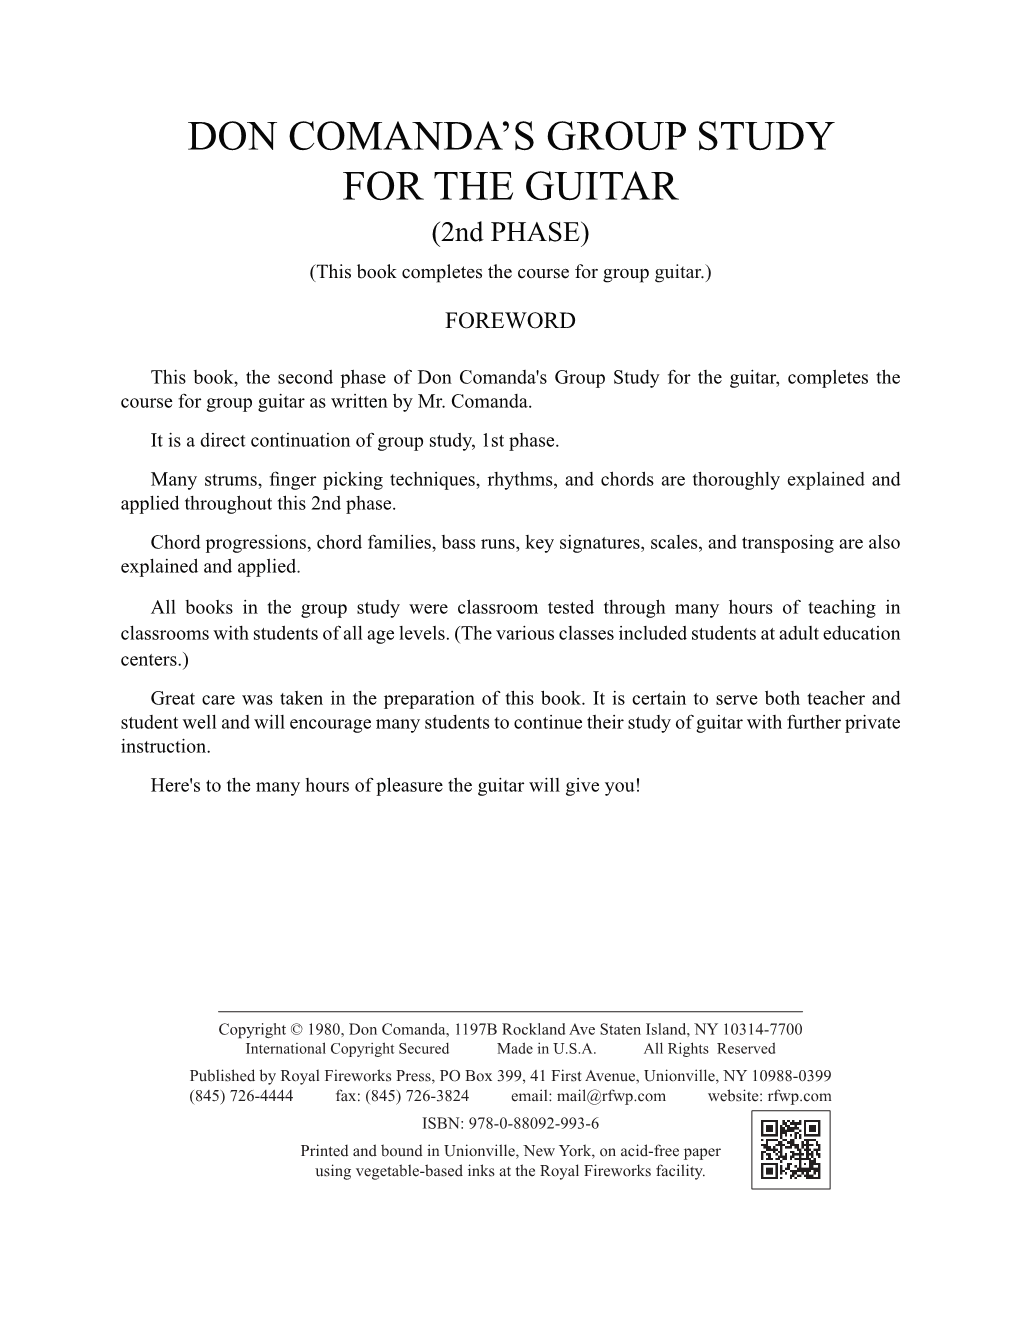 Don Comanda's Group Study for the Guitar, Completes the Course for Group Guitar As Written by Mr